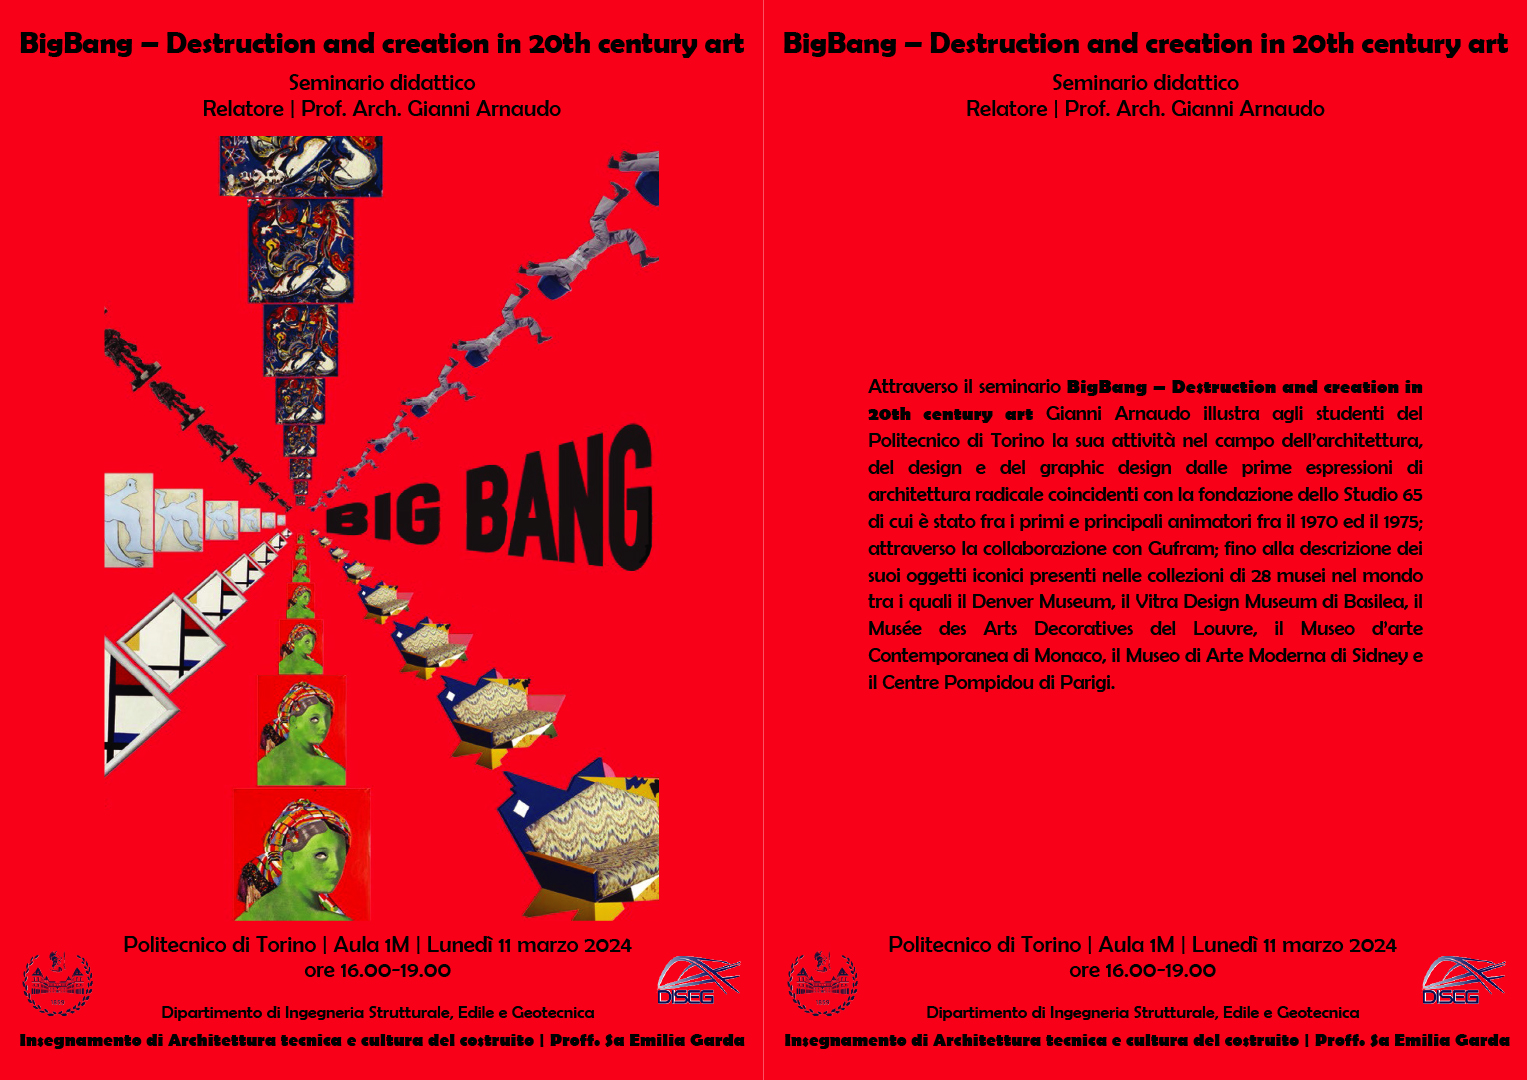 BIGBANG - DESTRUCTION AND CREATION IN THE 20TH CENTURY  ART